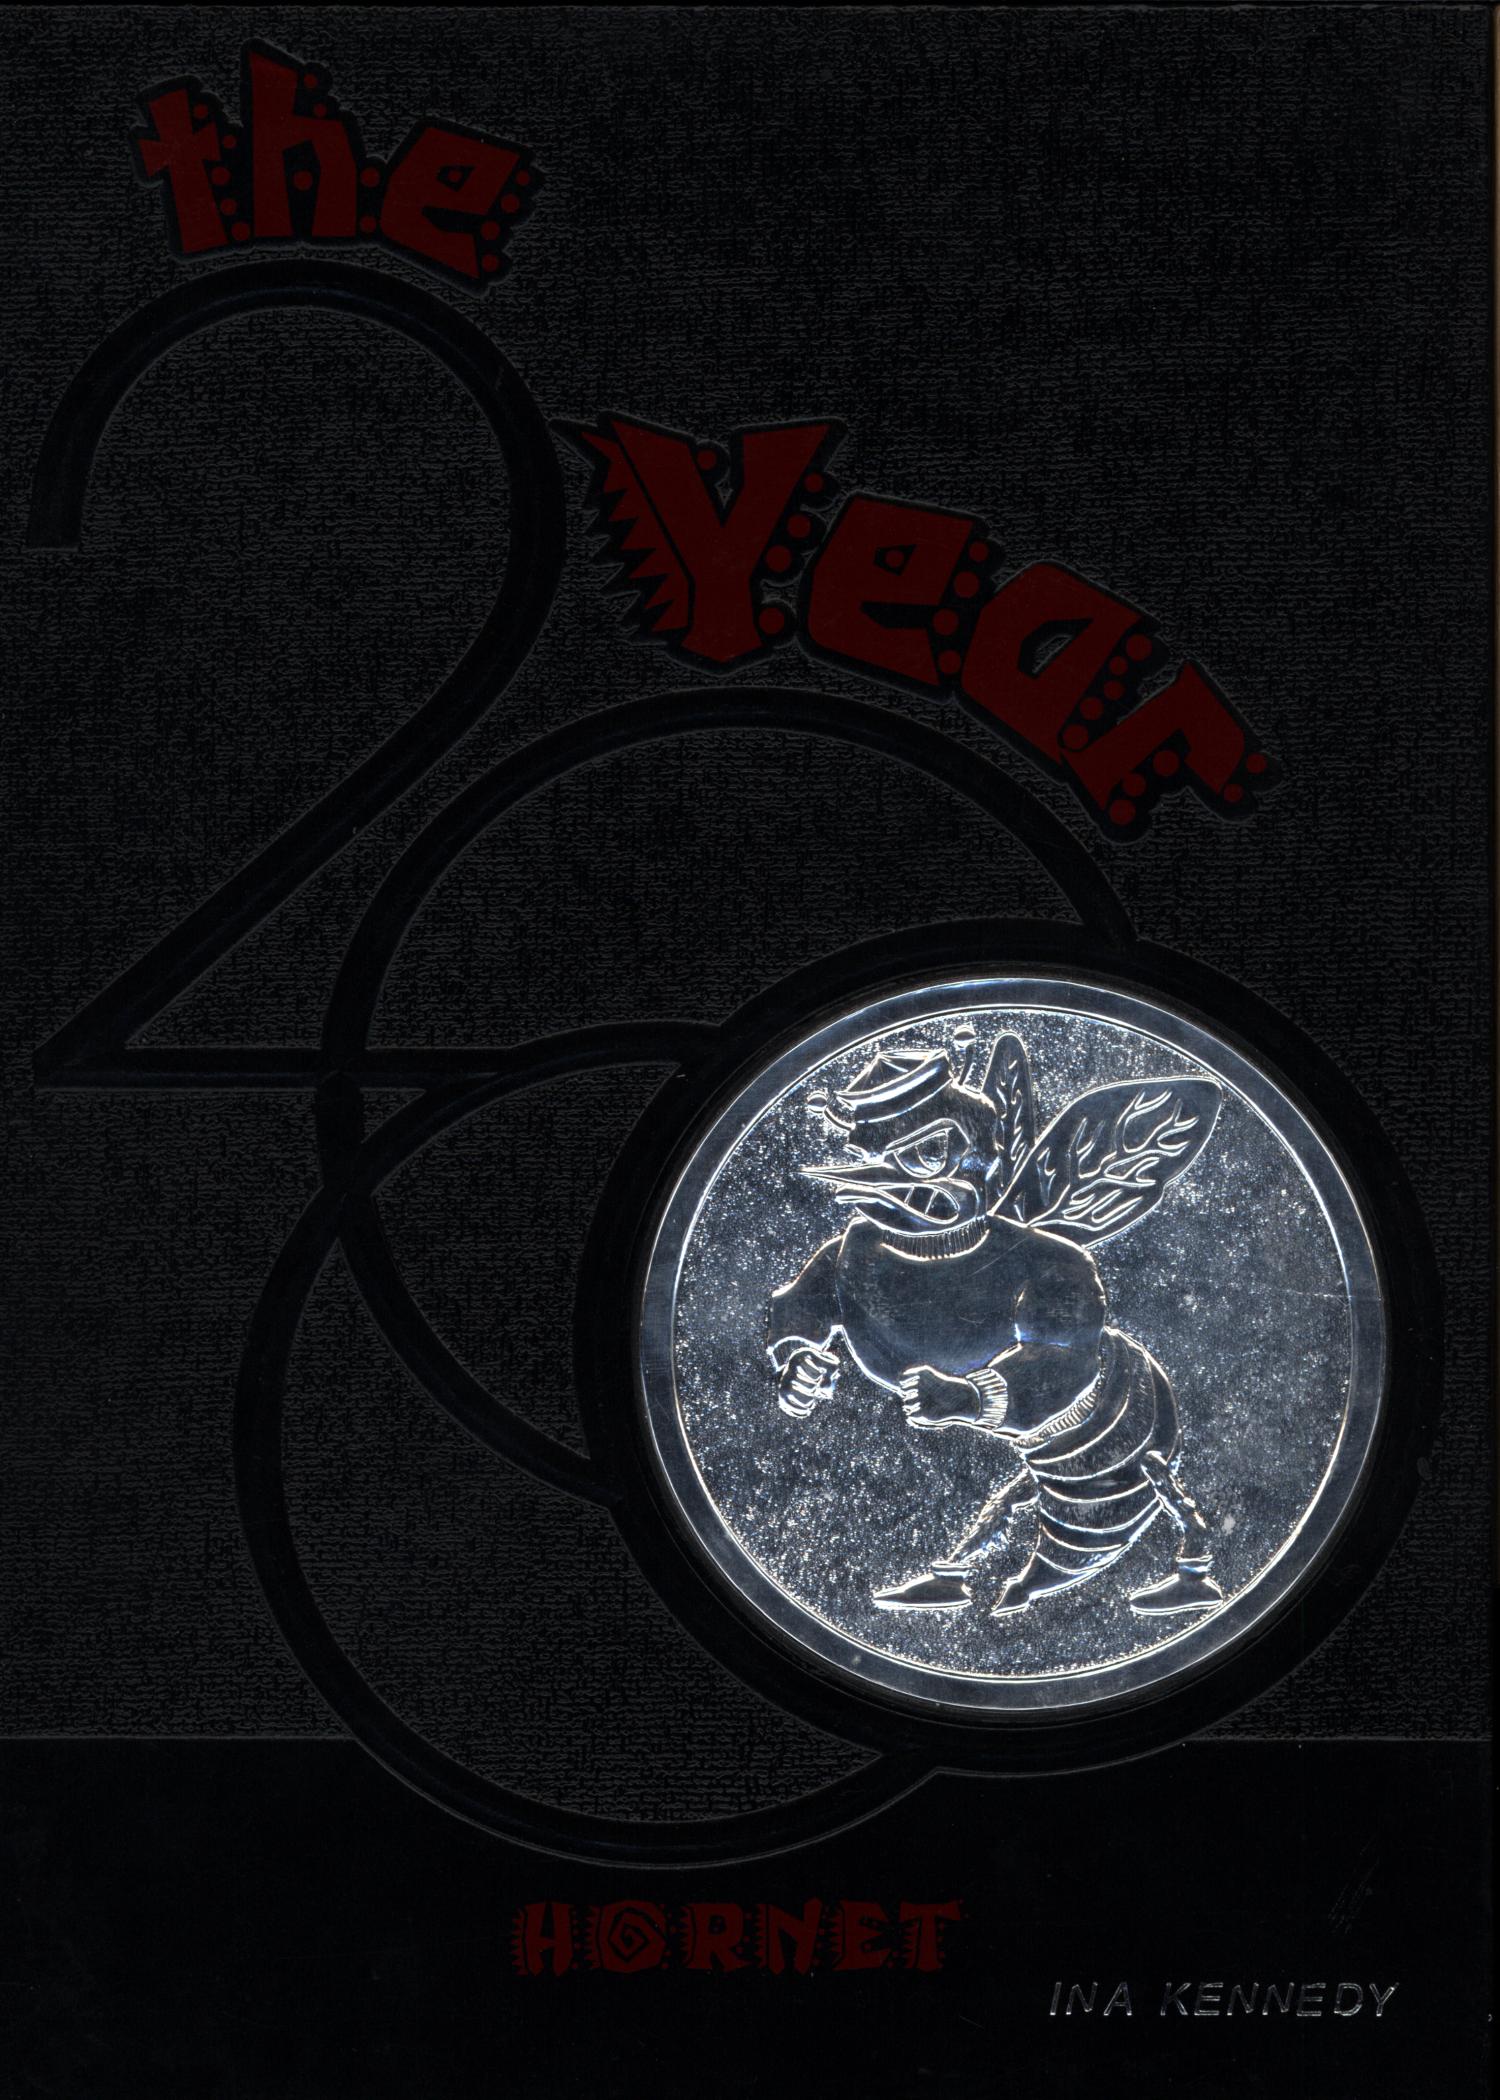 The Hornet, Yearbook of Aspermont Students, 2000
                                                
                                                    Front Cover
                                                